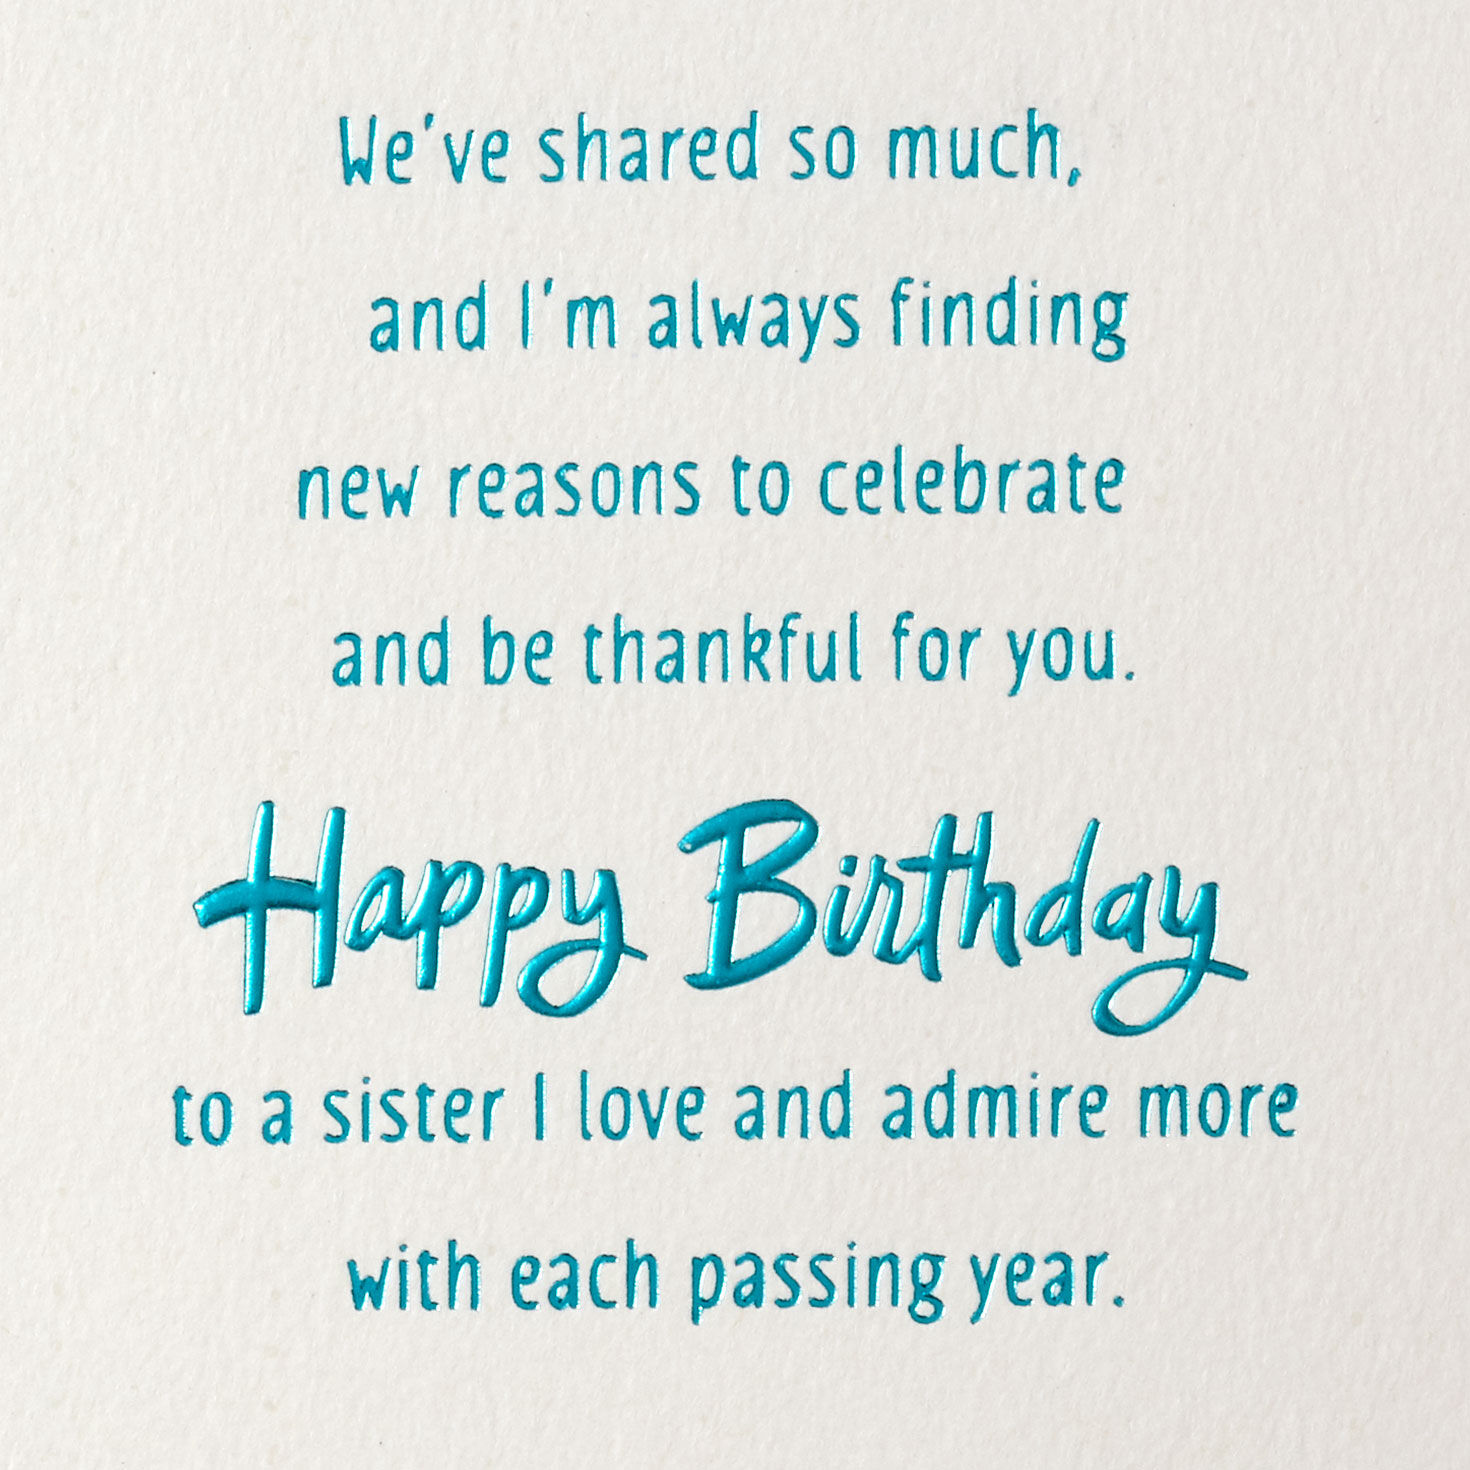 I Love Celebrating You Birthday Card for Sister for only USD 5.59 | Hallmark